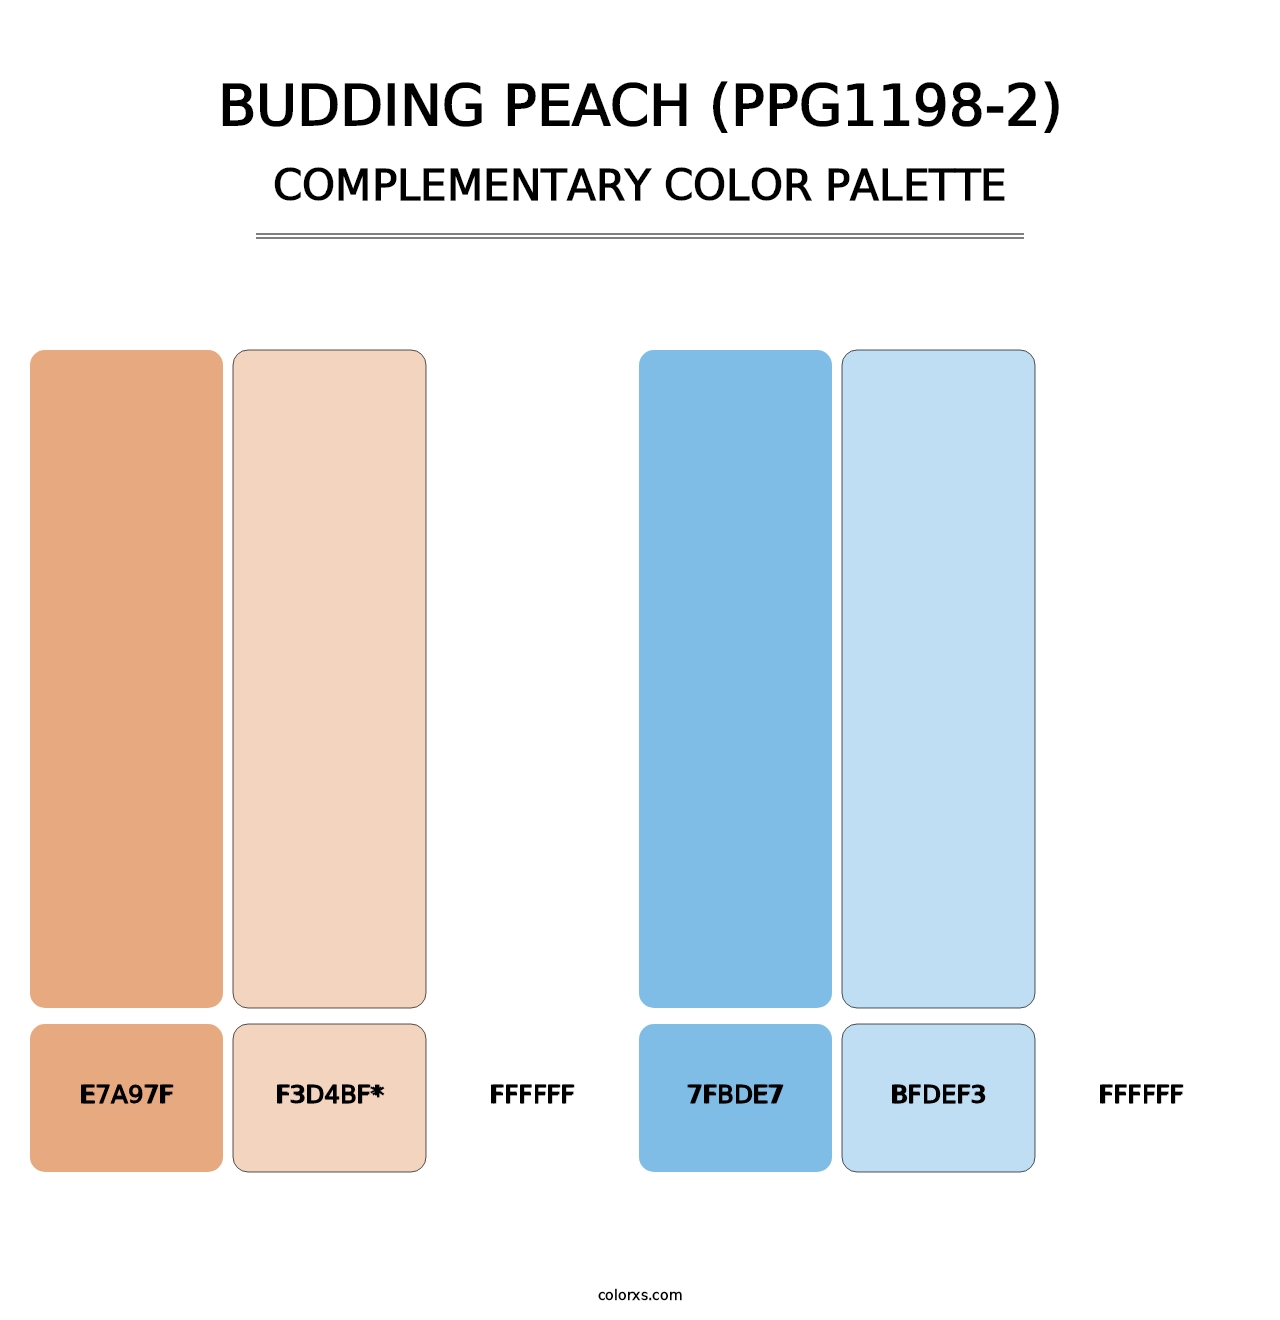 Budding Peach (PPG1198-2) - Complementary Color Palette